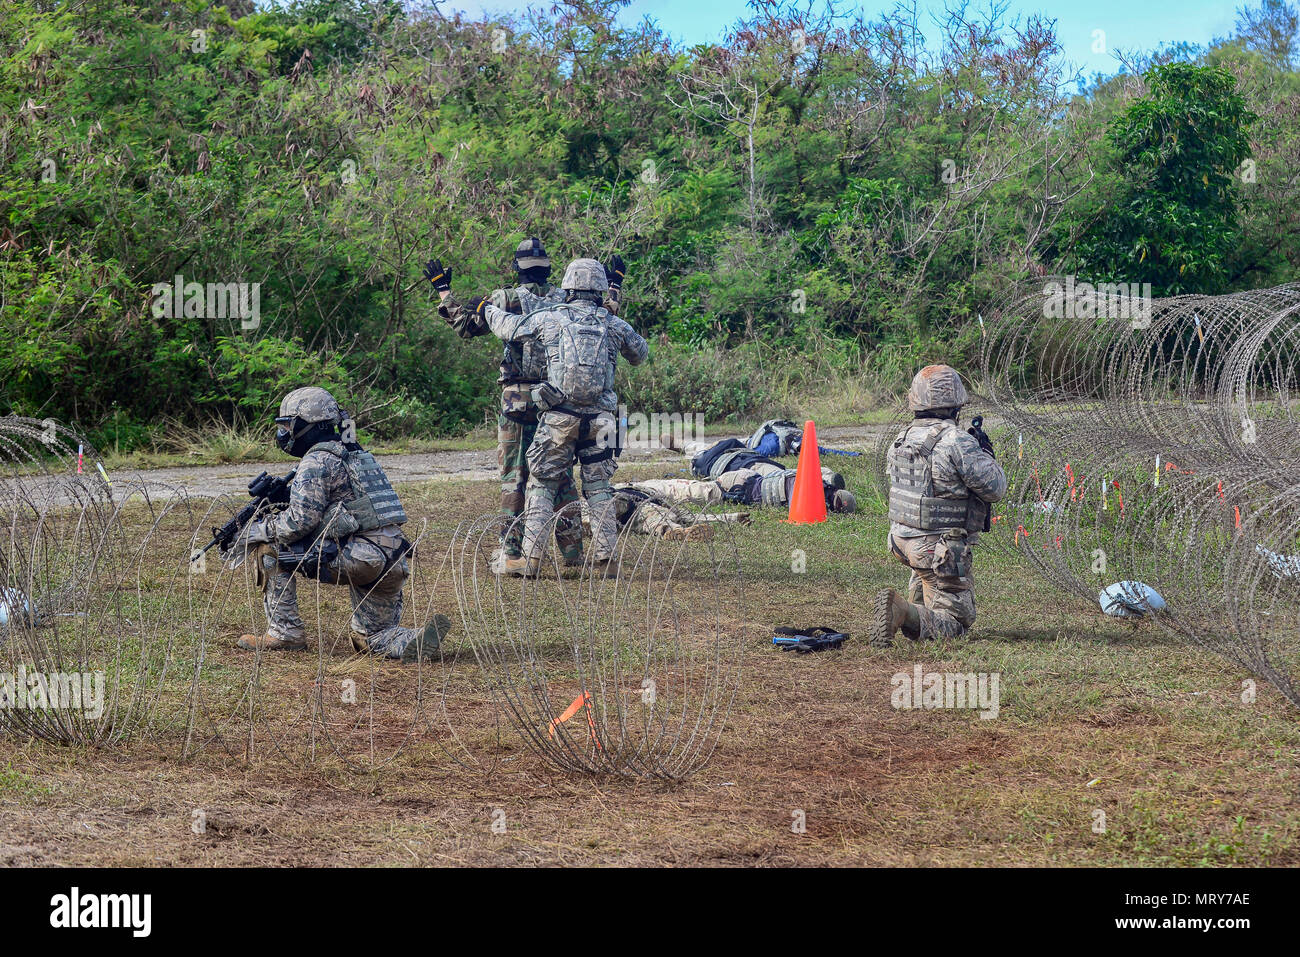 U.S. Air Force Airmen from the 644th Combat Communications Squadron captures an Airman acting as an opposing force during exercise Dragon Forge June 15, 2017, at Andersen South, Guam. Opposing forces repeatedly attacked the base throughout the day prior to an all-out final attack from all sides with the goal of overrunning the base. (U.S. Air Force photo by Airman 1st Class Christopher Quail) Stock Photo